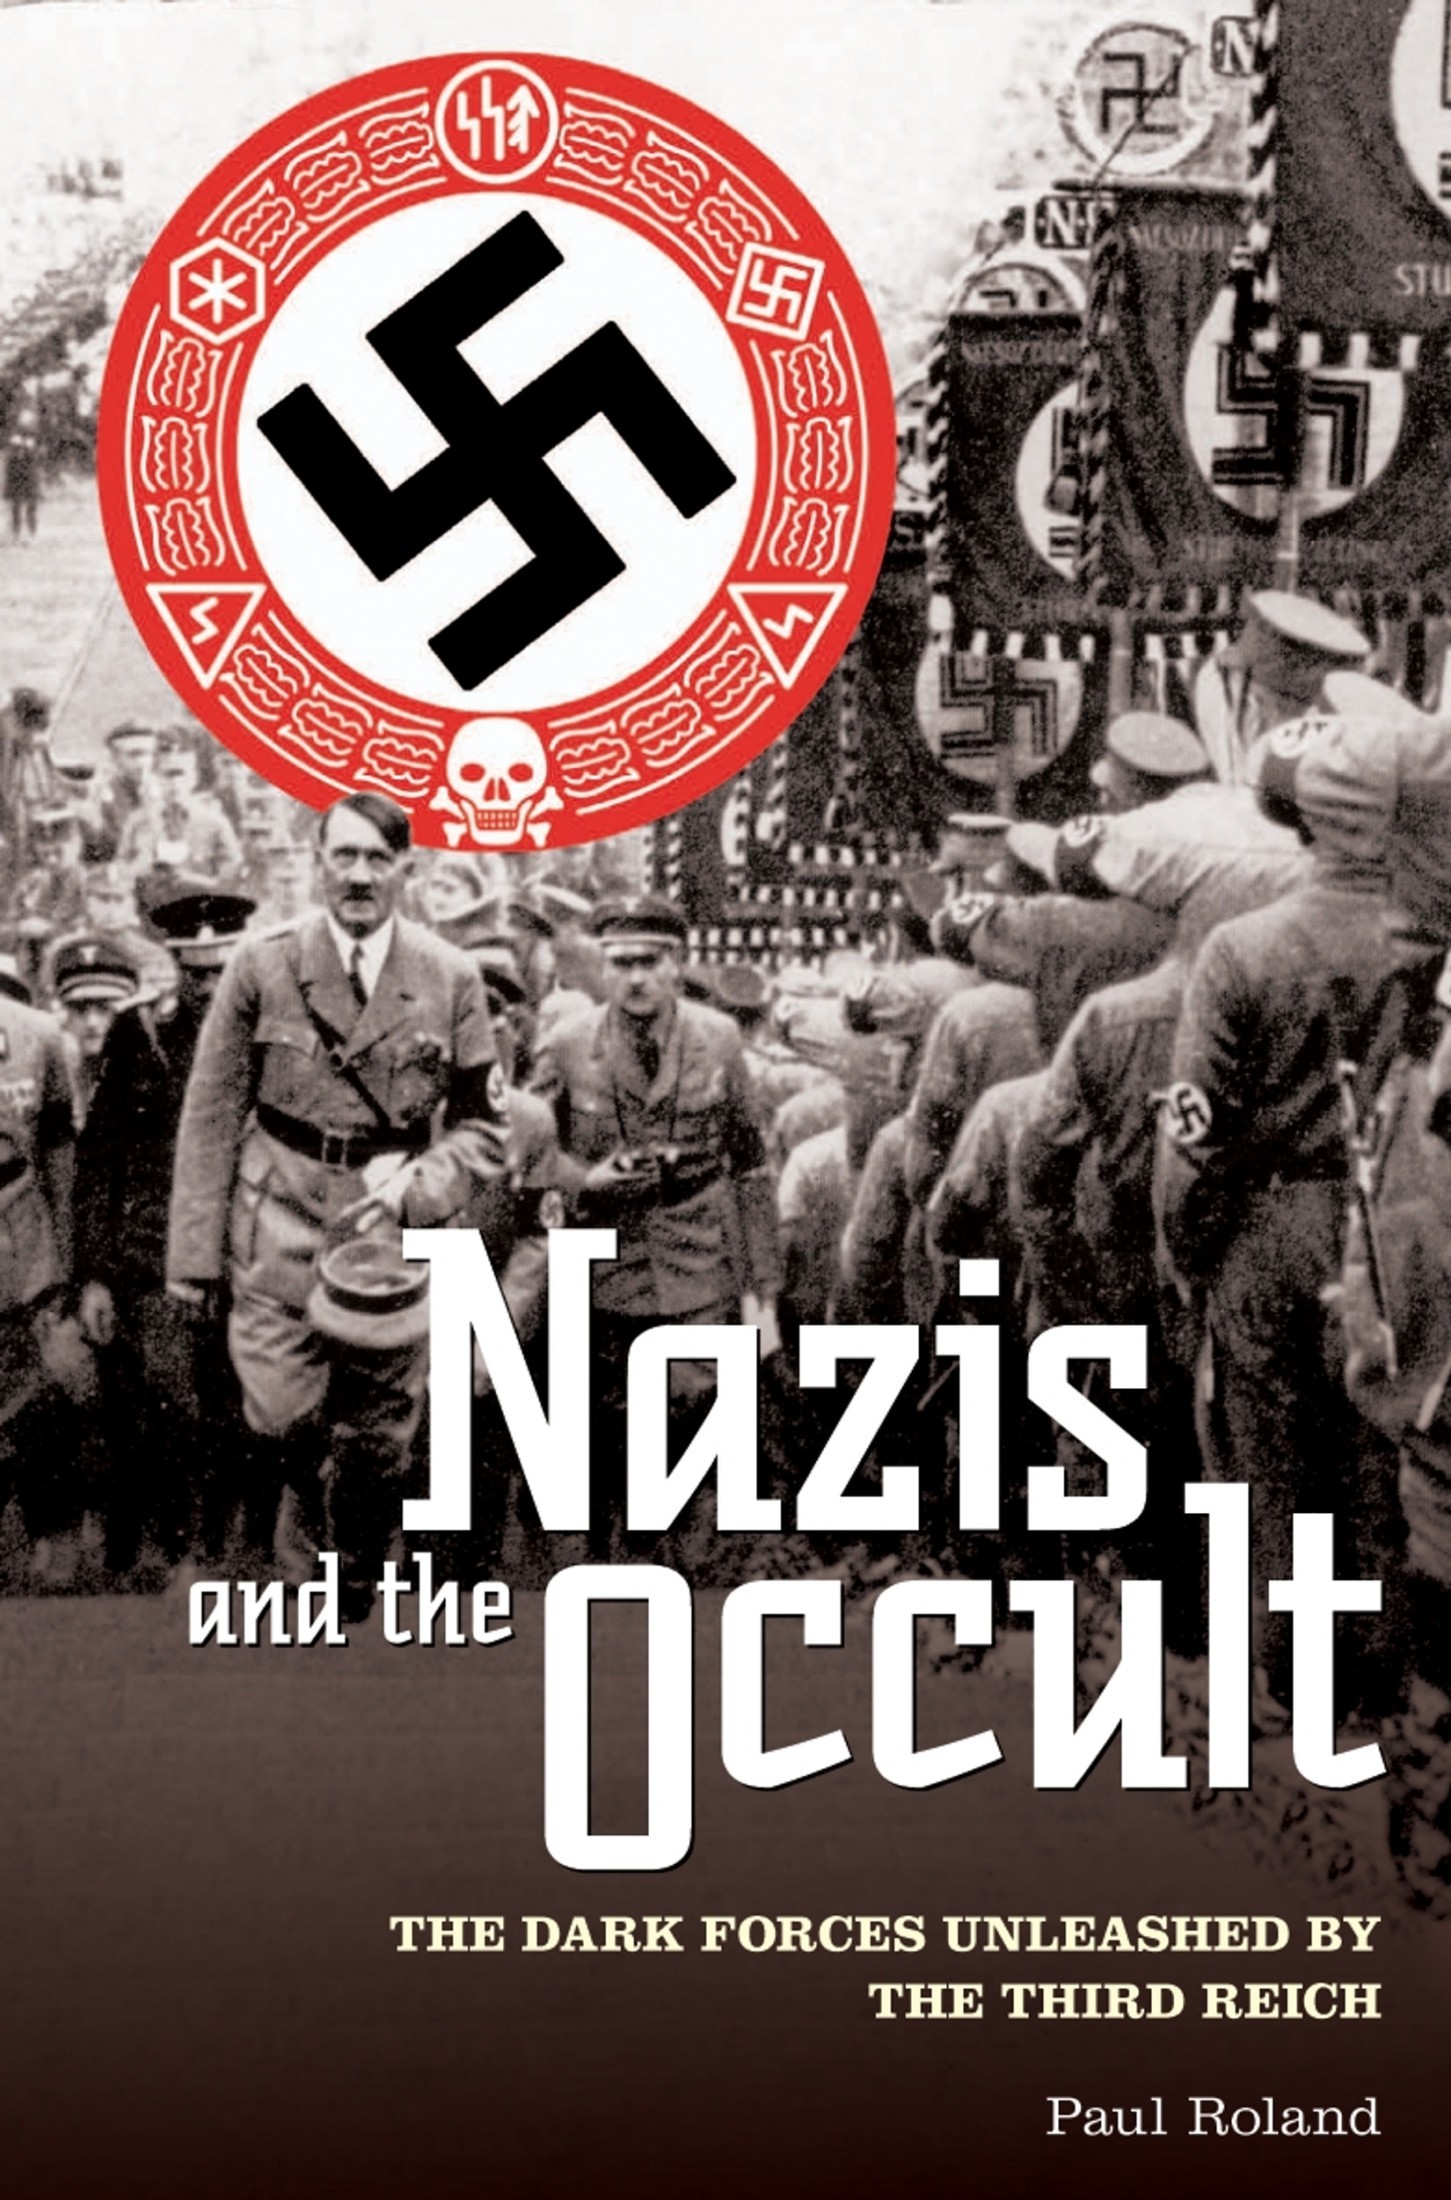 Nazis and the Occult: The Dark Forces Unleashed by the Third Reich